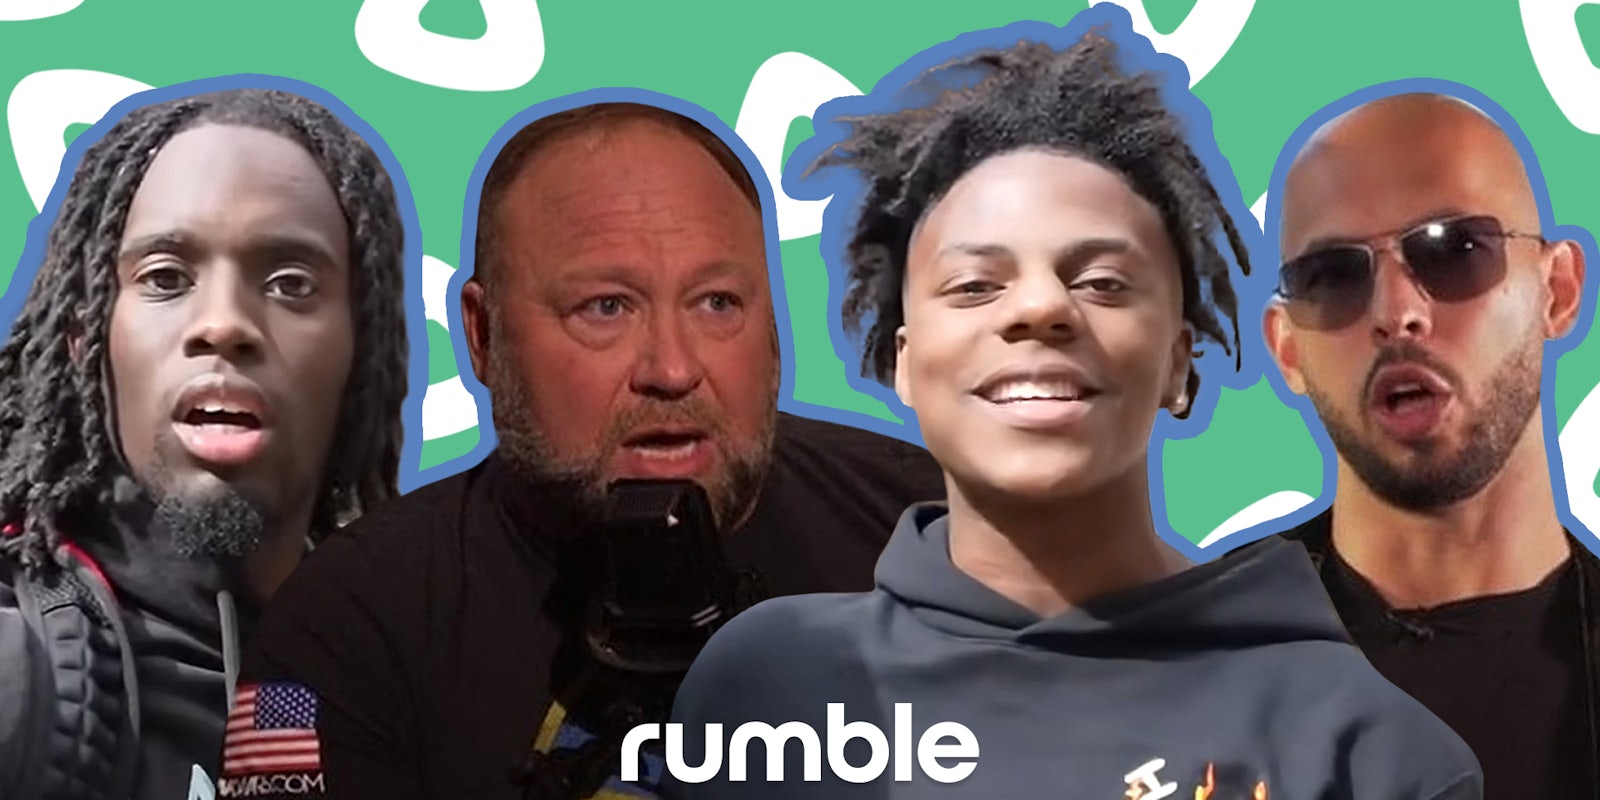 Kai Cenat, Alex Jones, iShowSpeed, and Andrew Tate in front of green Rumble logo background with Rumble logo centered at bottom Passionfruit Remix